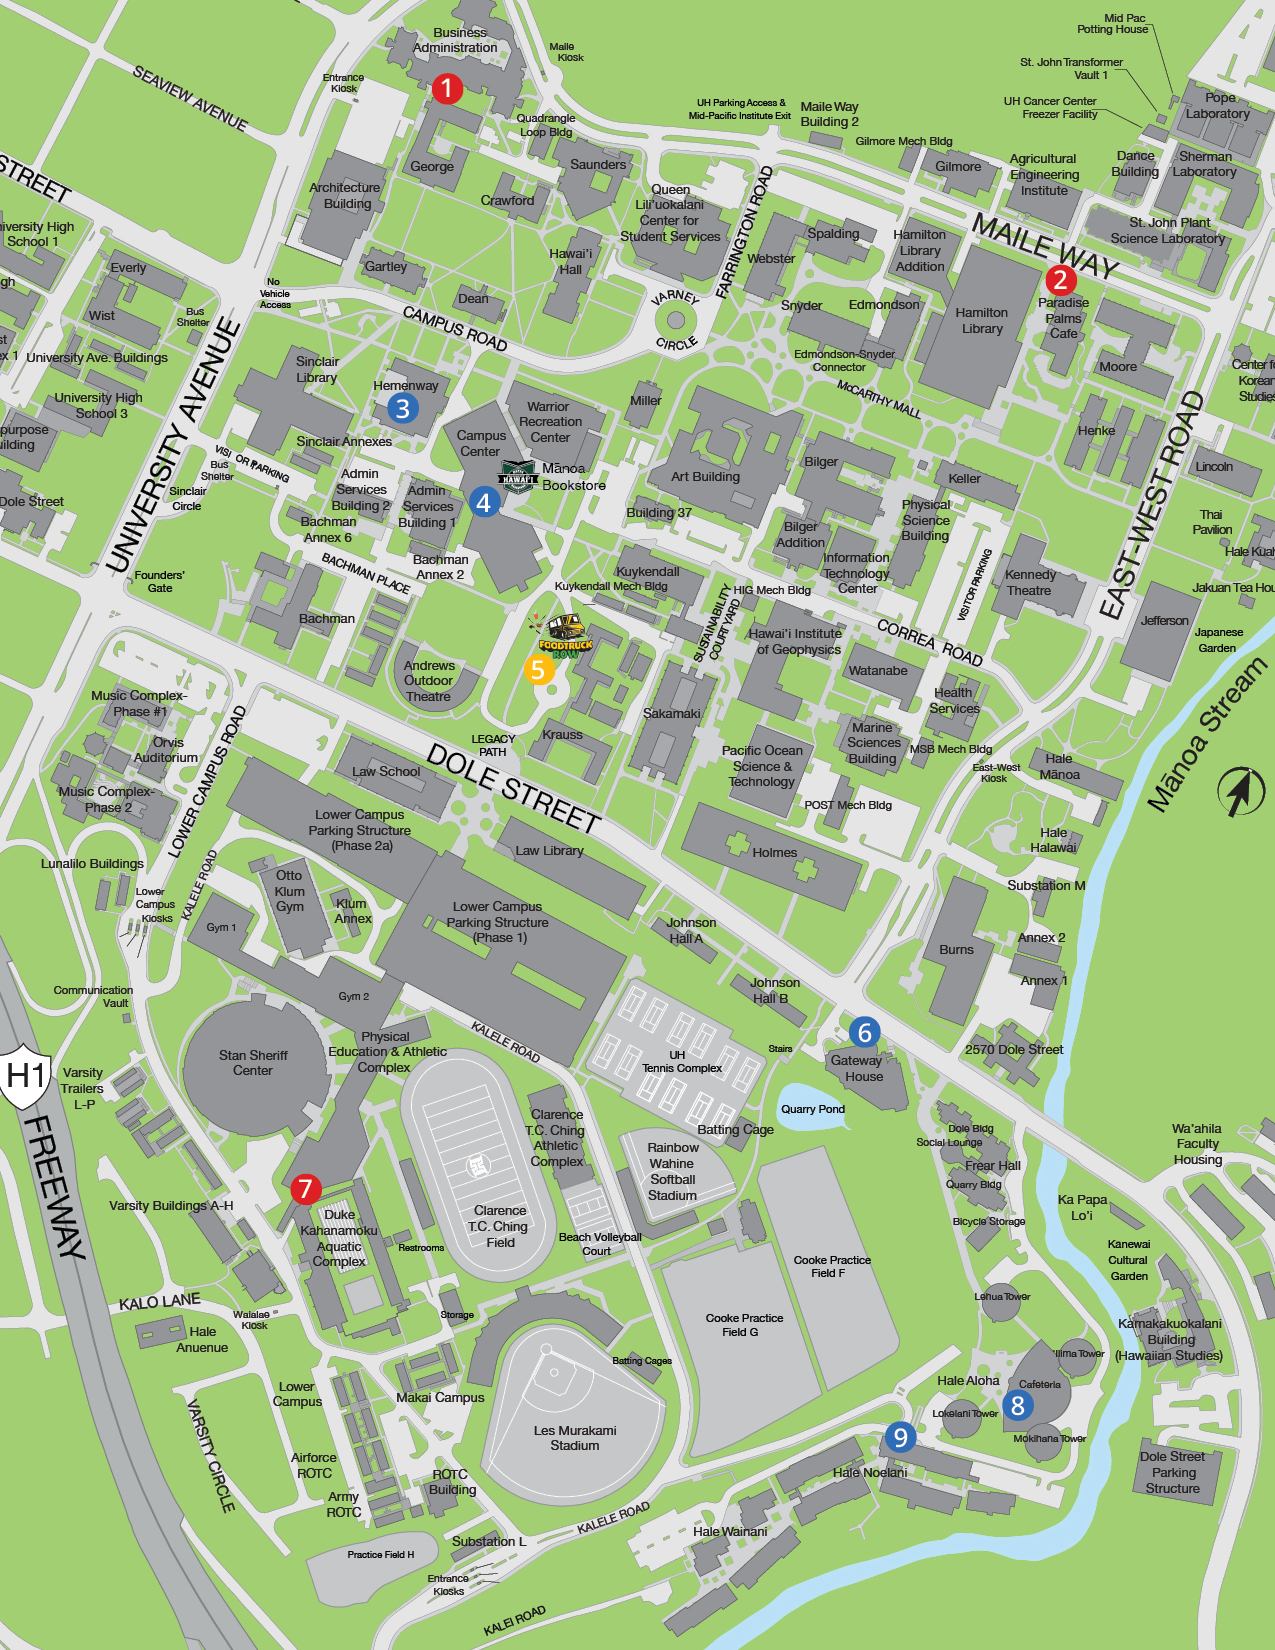 Map of all food vendors on campus